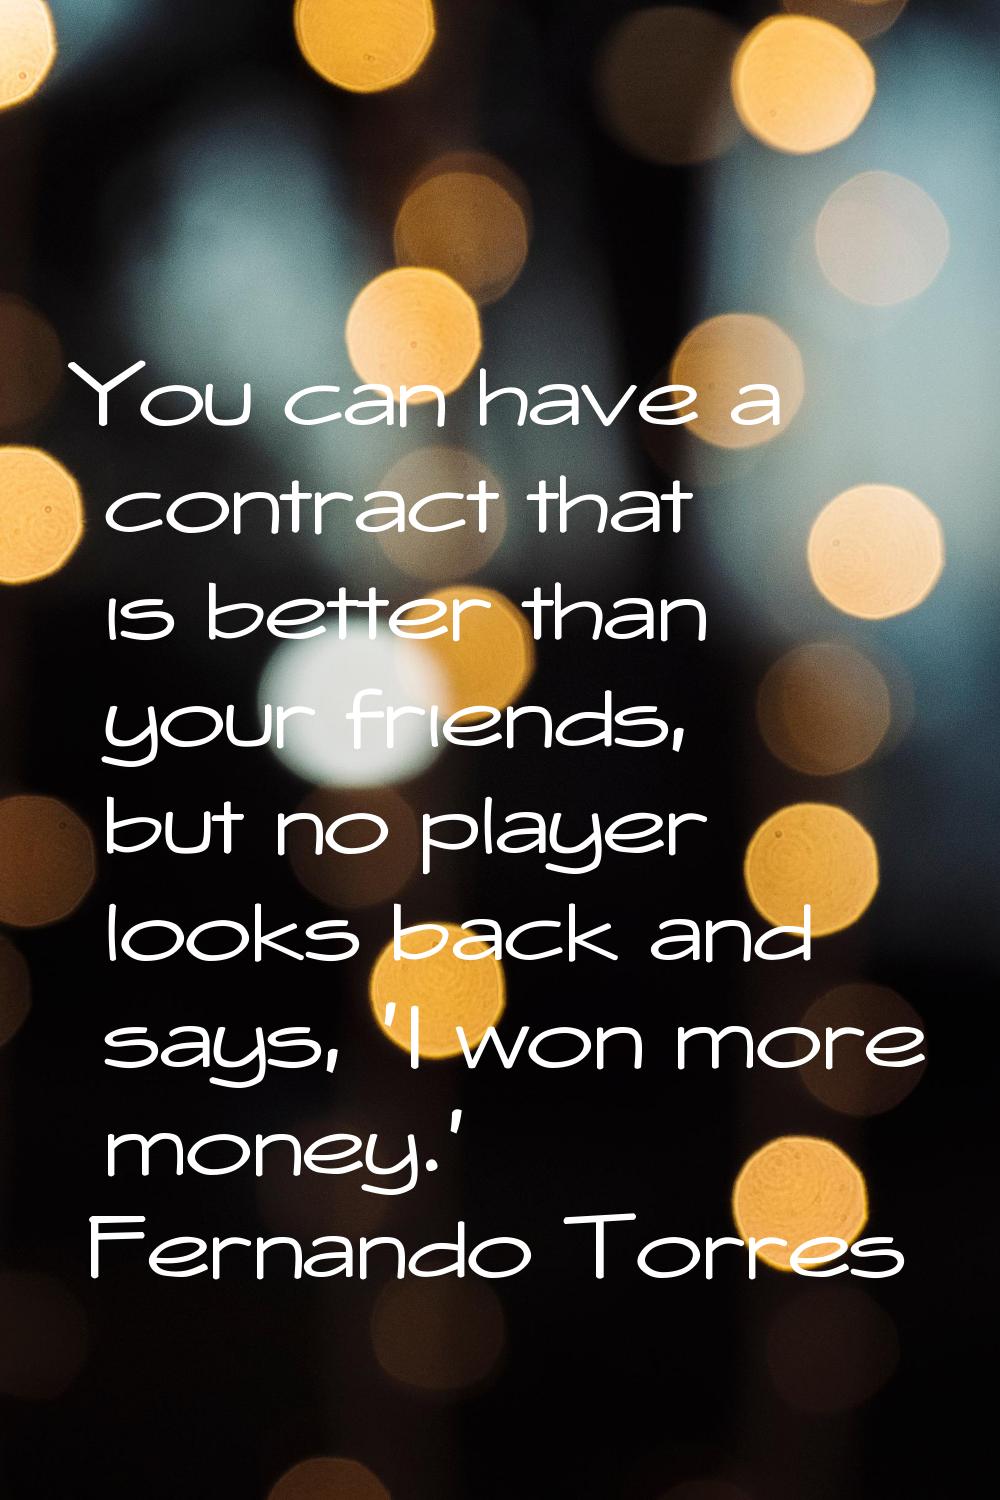 You can have a contract that is better than your friends, but no player looks back and says, 'I won